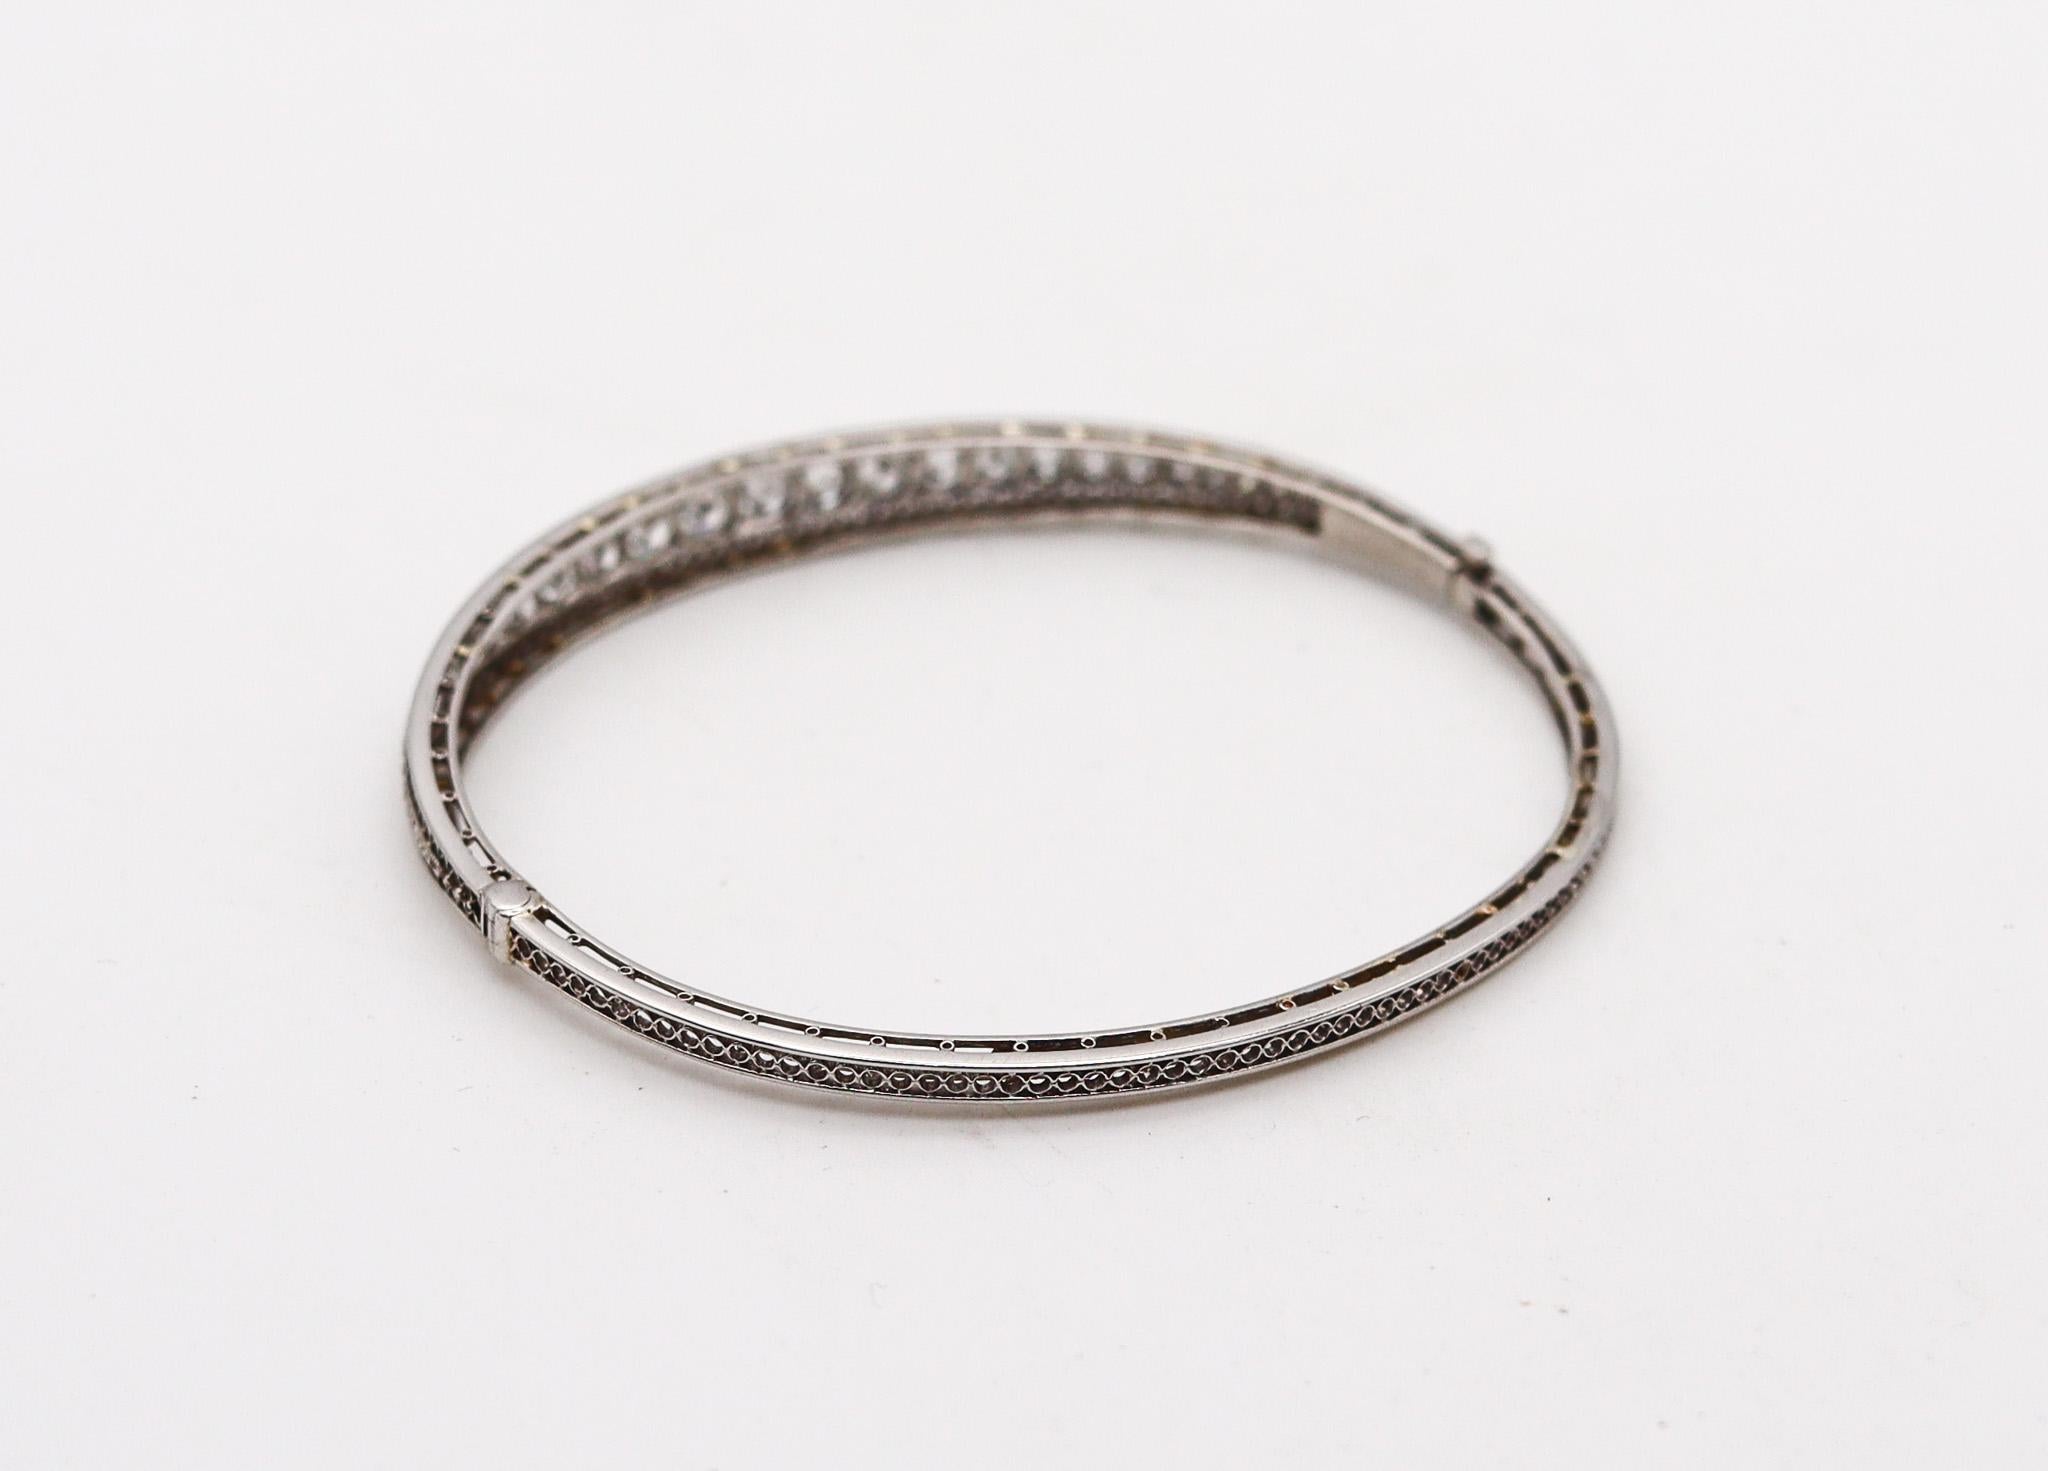 Marcus & Co. 1910 Edwardian Bangle Bracelet In Platinum With 3.16 Ctw In Diamond For Sale 1